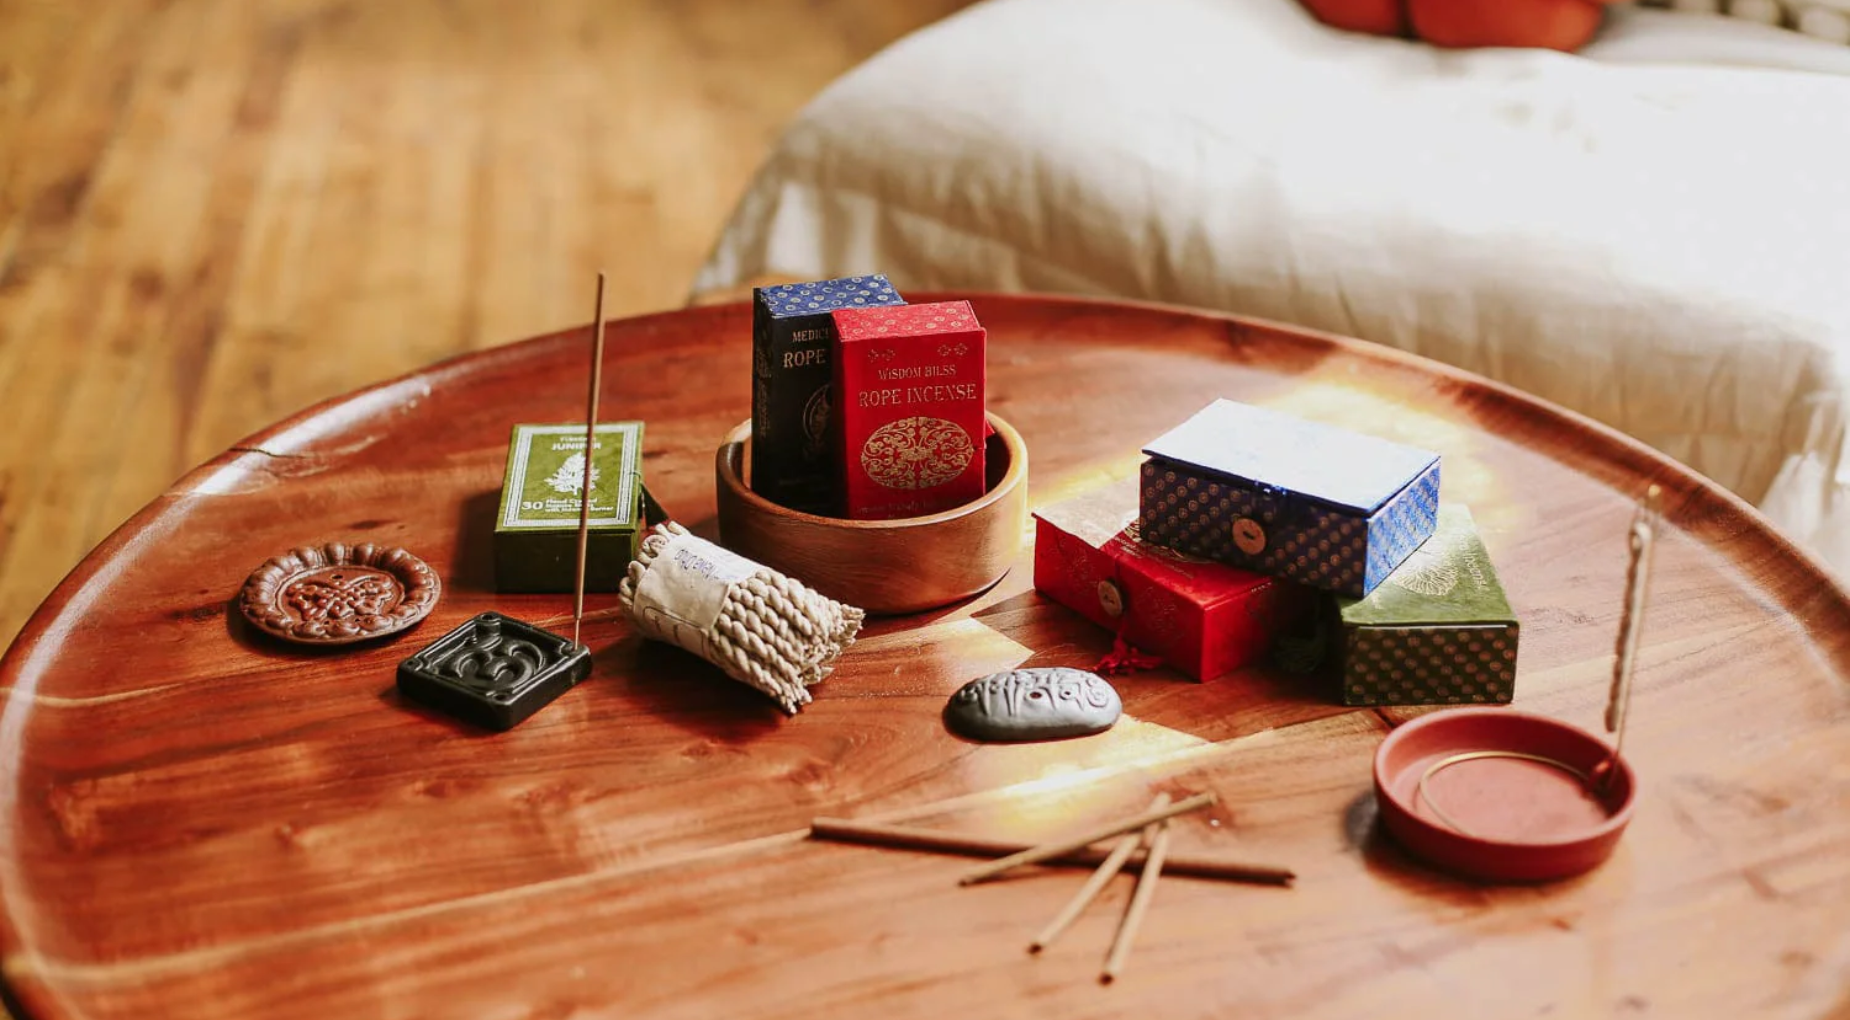 Do incense help with anxiety?